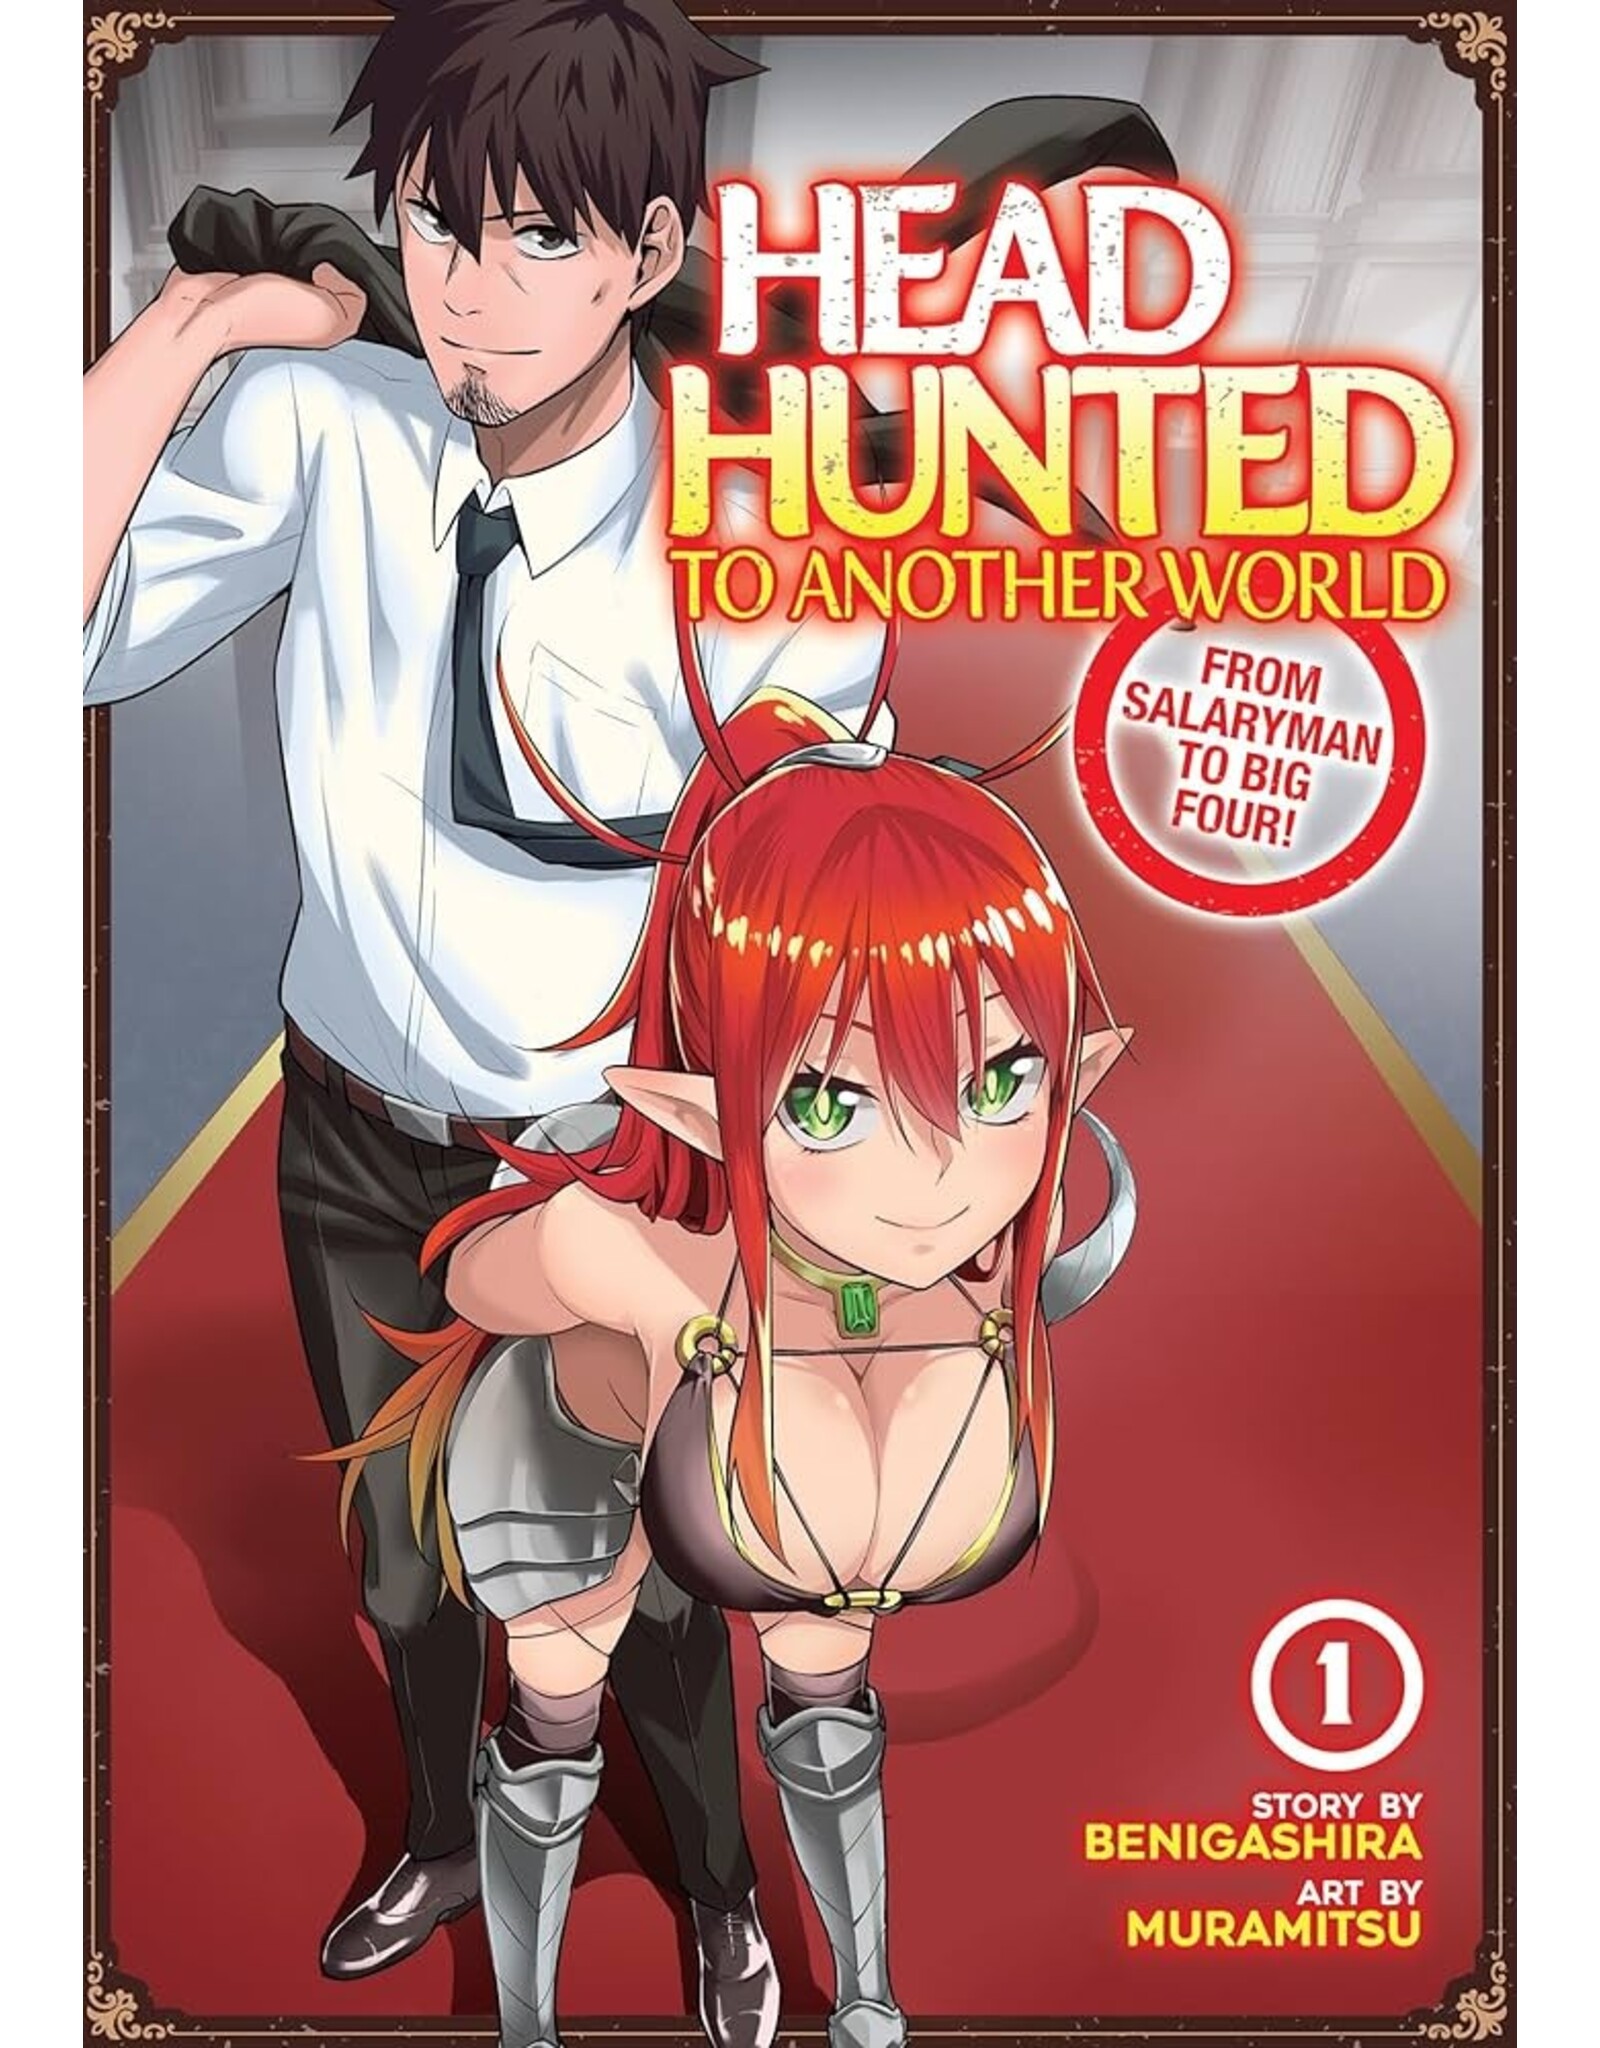 Head Hunted To Another World Vol. 1-4 Manga Bundle (Used)